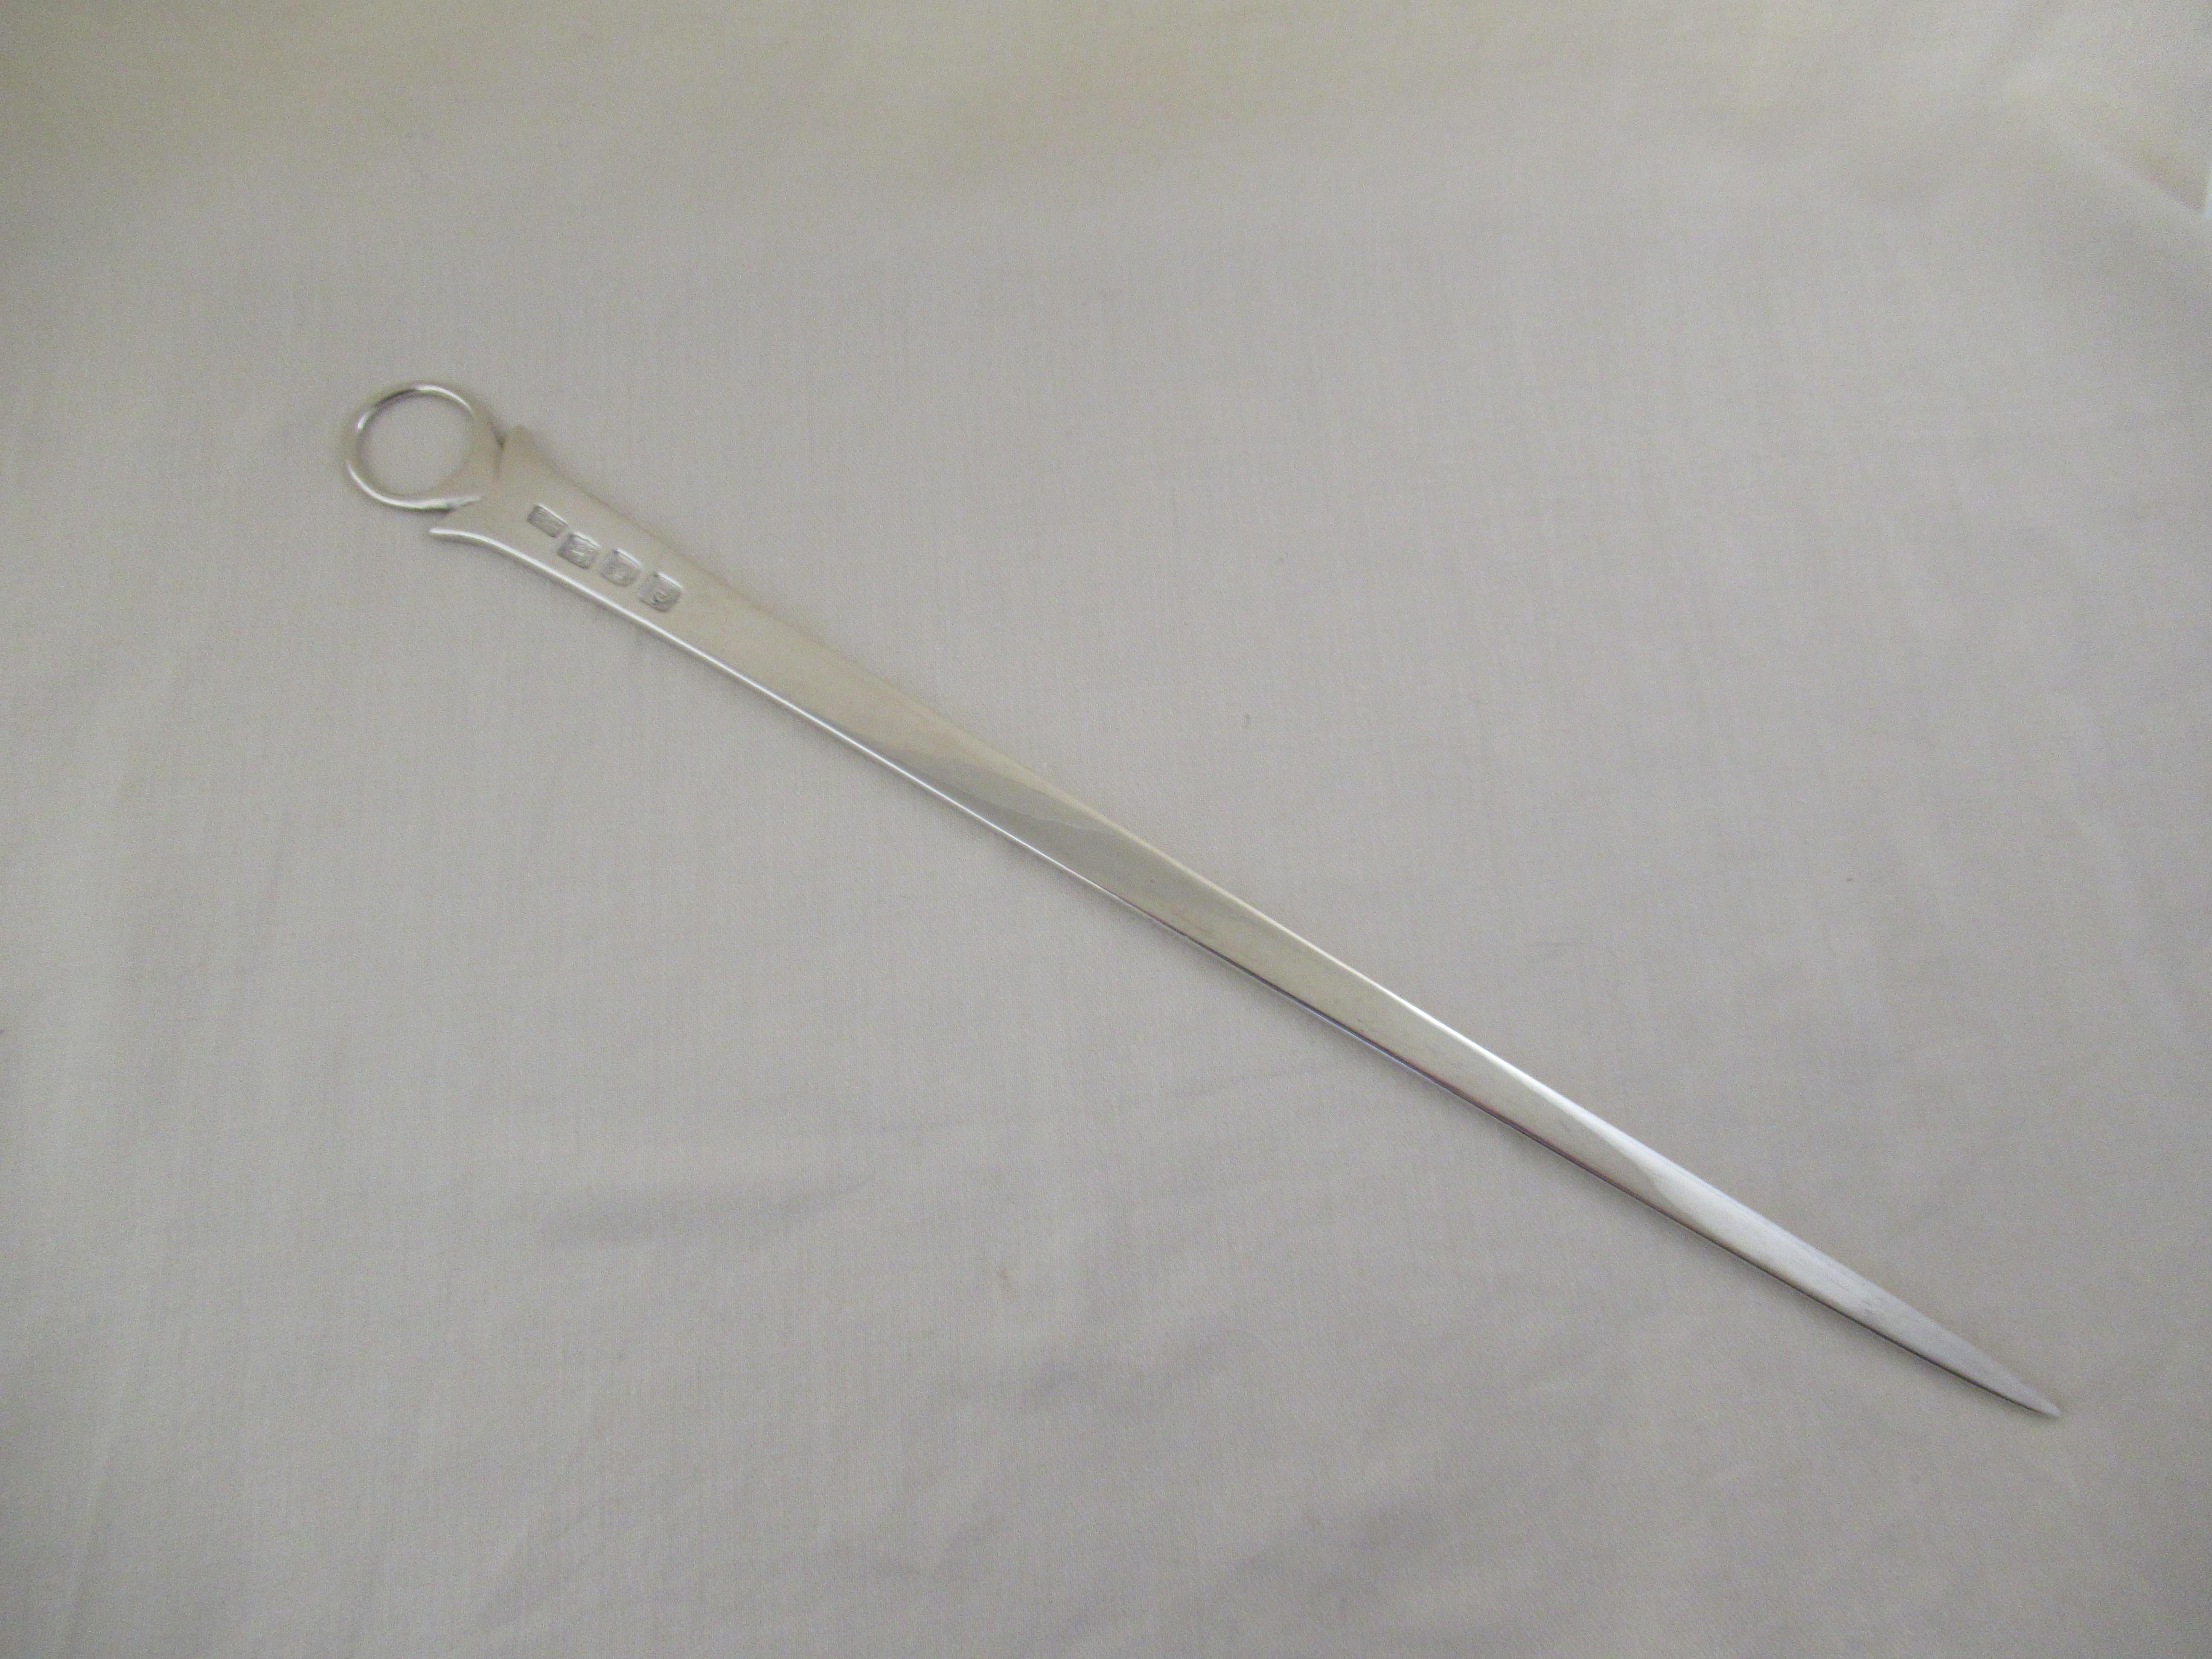 Sterling silver George II meat skewer / paper knife.
A superb set of hallmarks applied by the London Assay Office:-
 Lion - sterling silver guarantee mark
 Leopard`s head - London Assay Office mark.
 Letter C - Date mark for London 1758
 W.C -